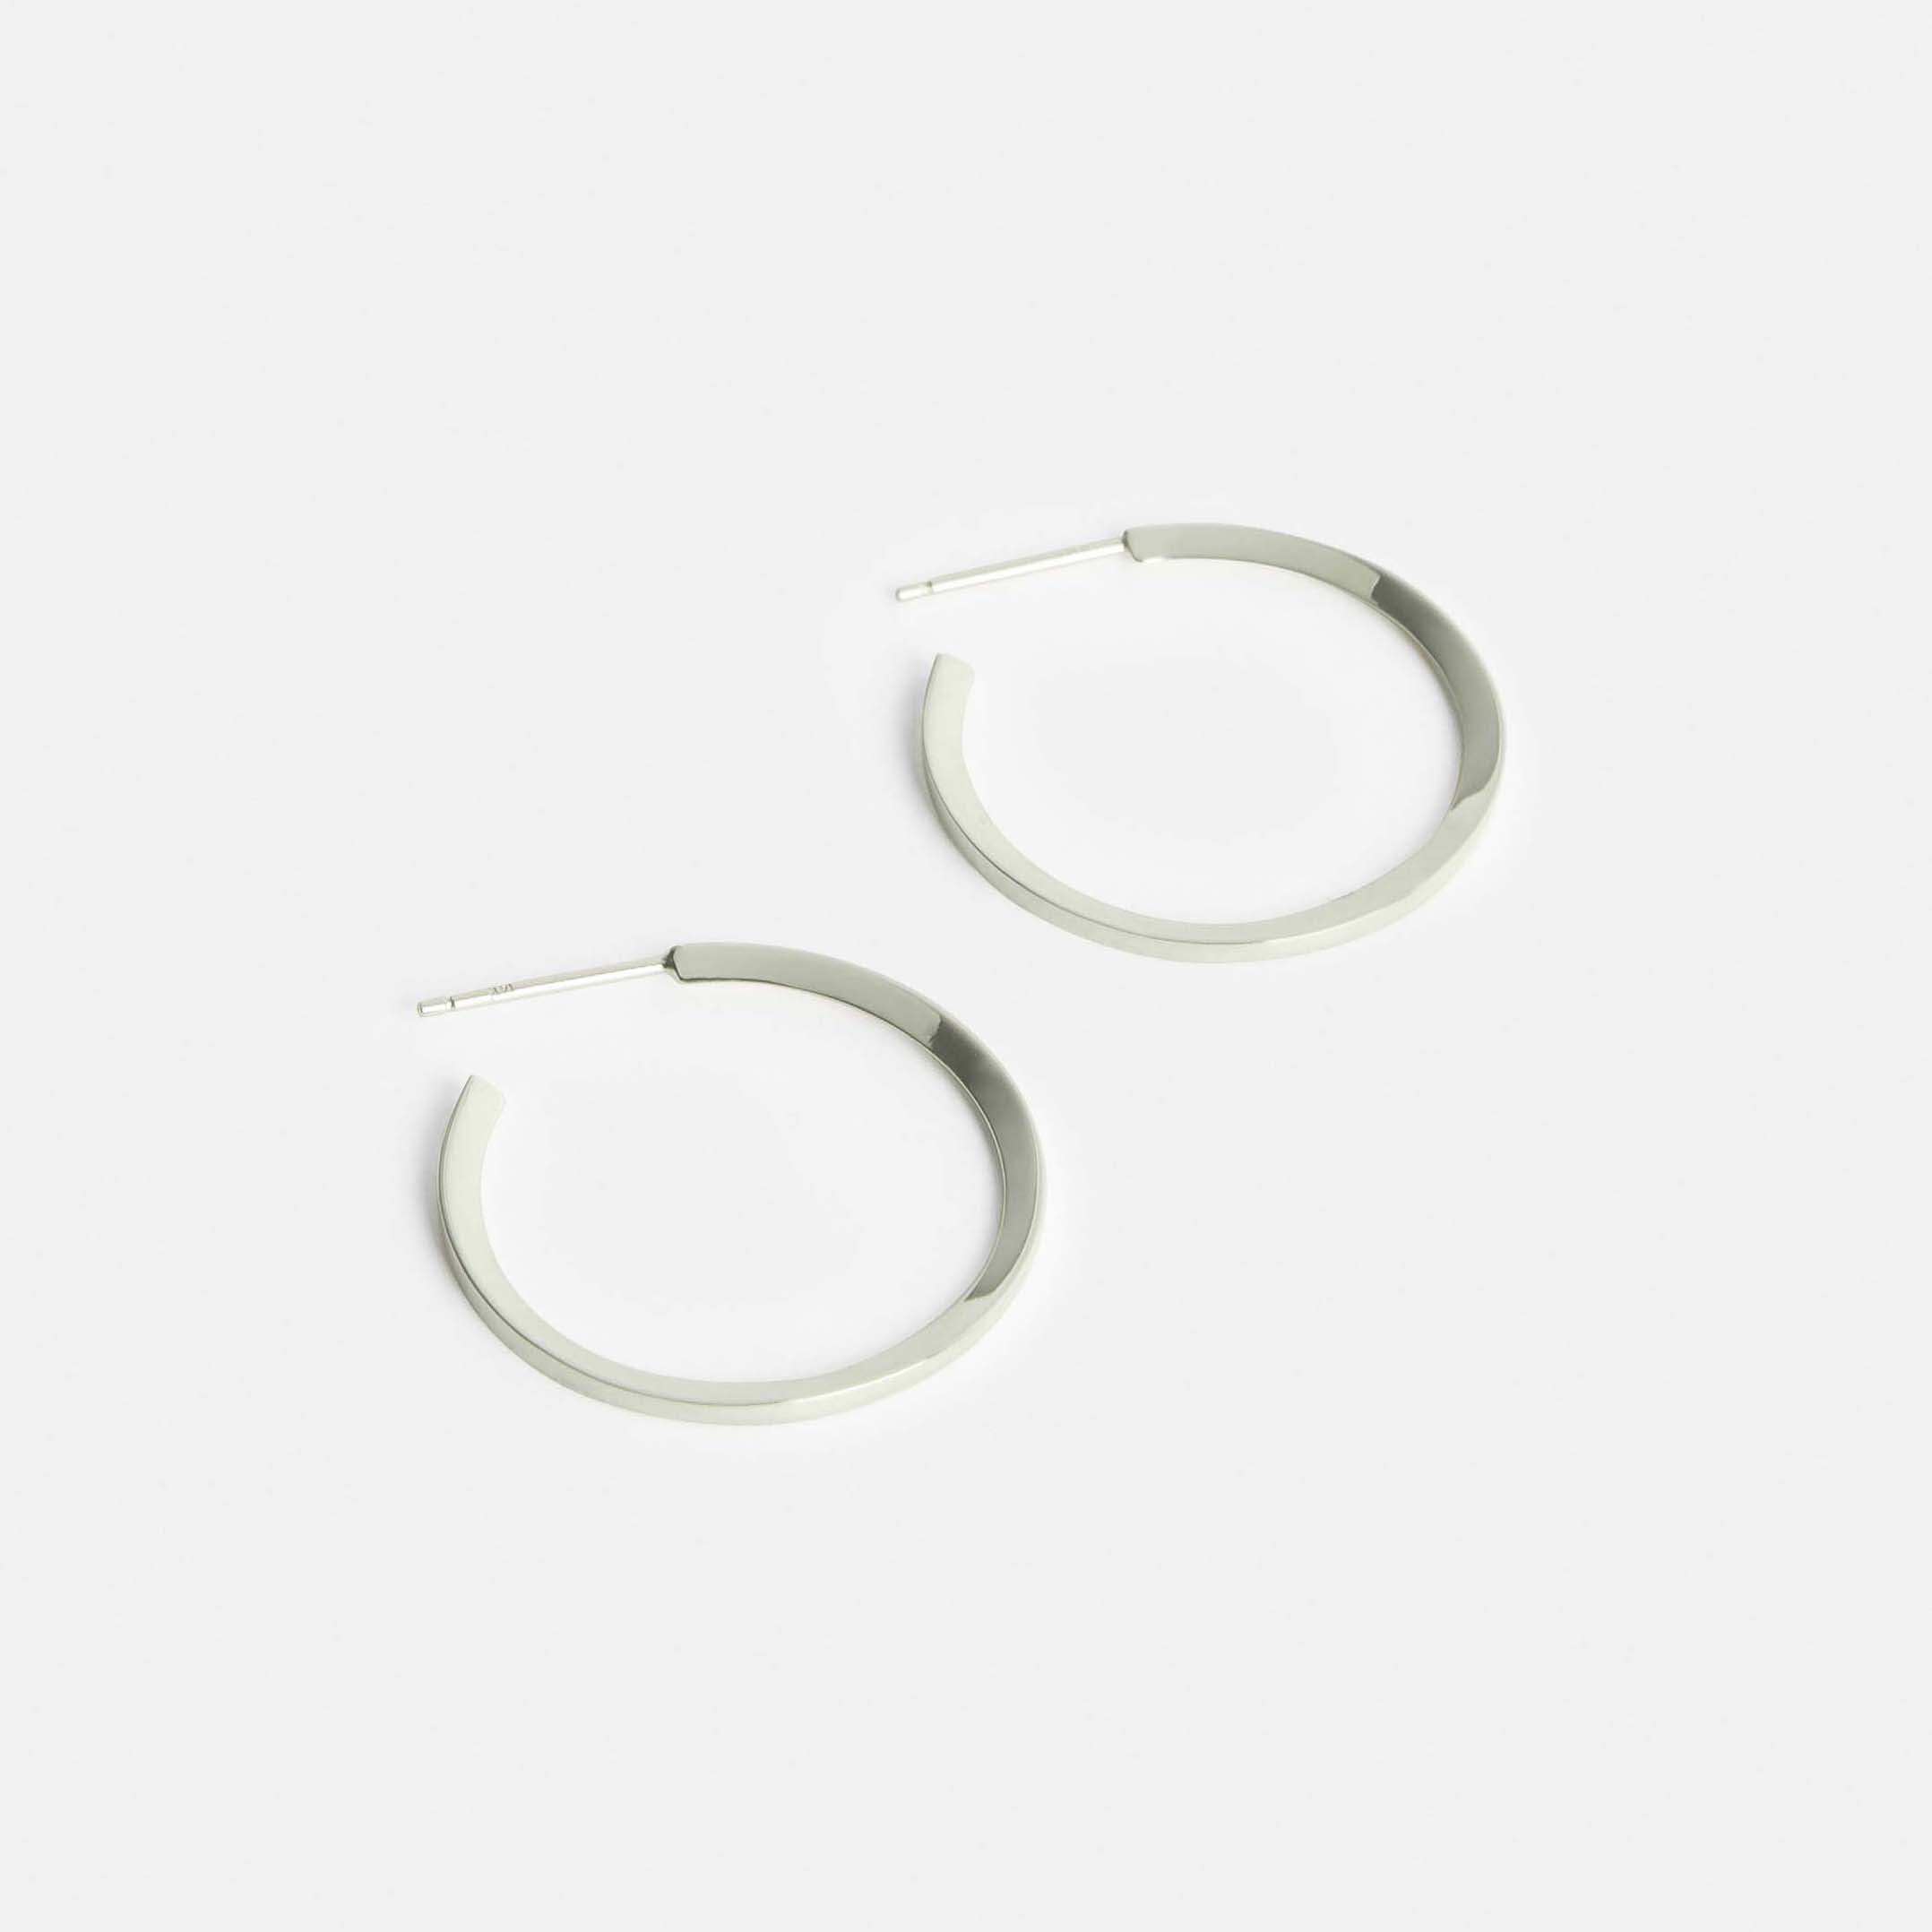  Large Kai Handmade Hoops in Sterling Silver By SHW Fine Jewelry NYC